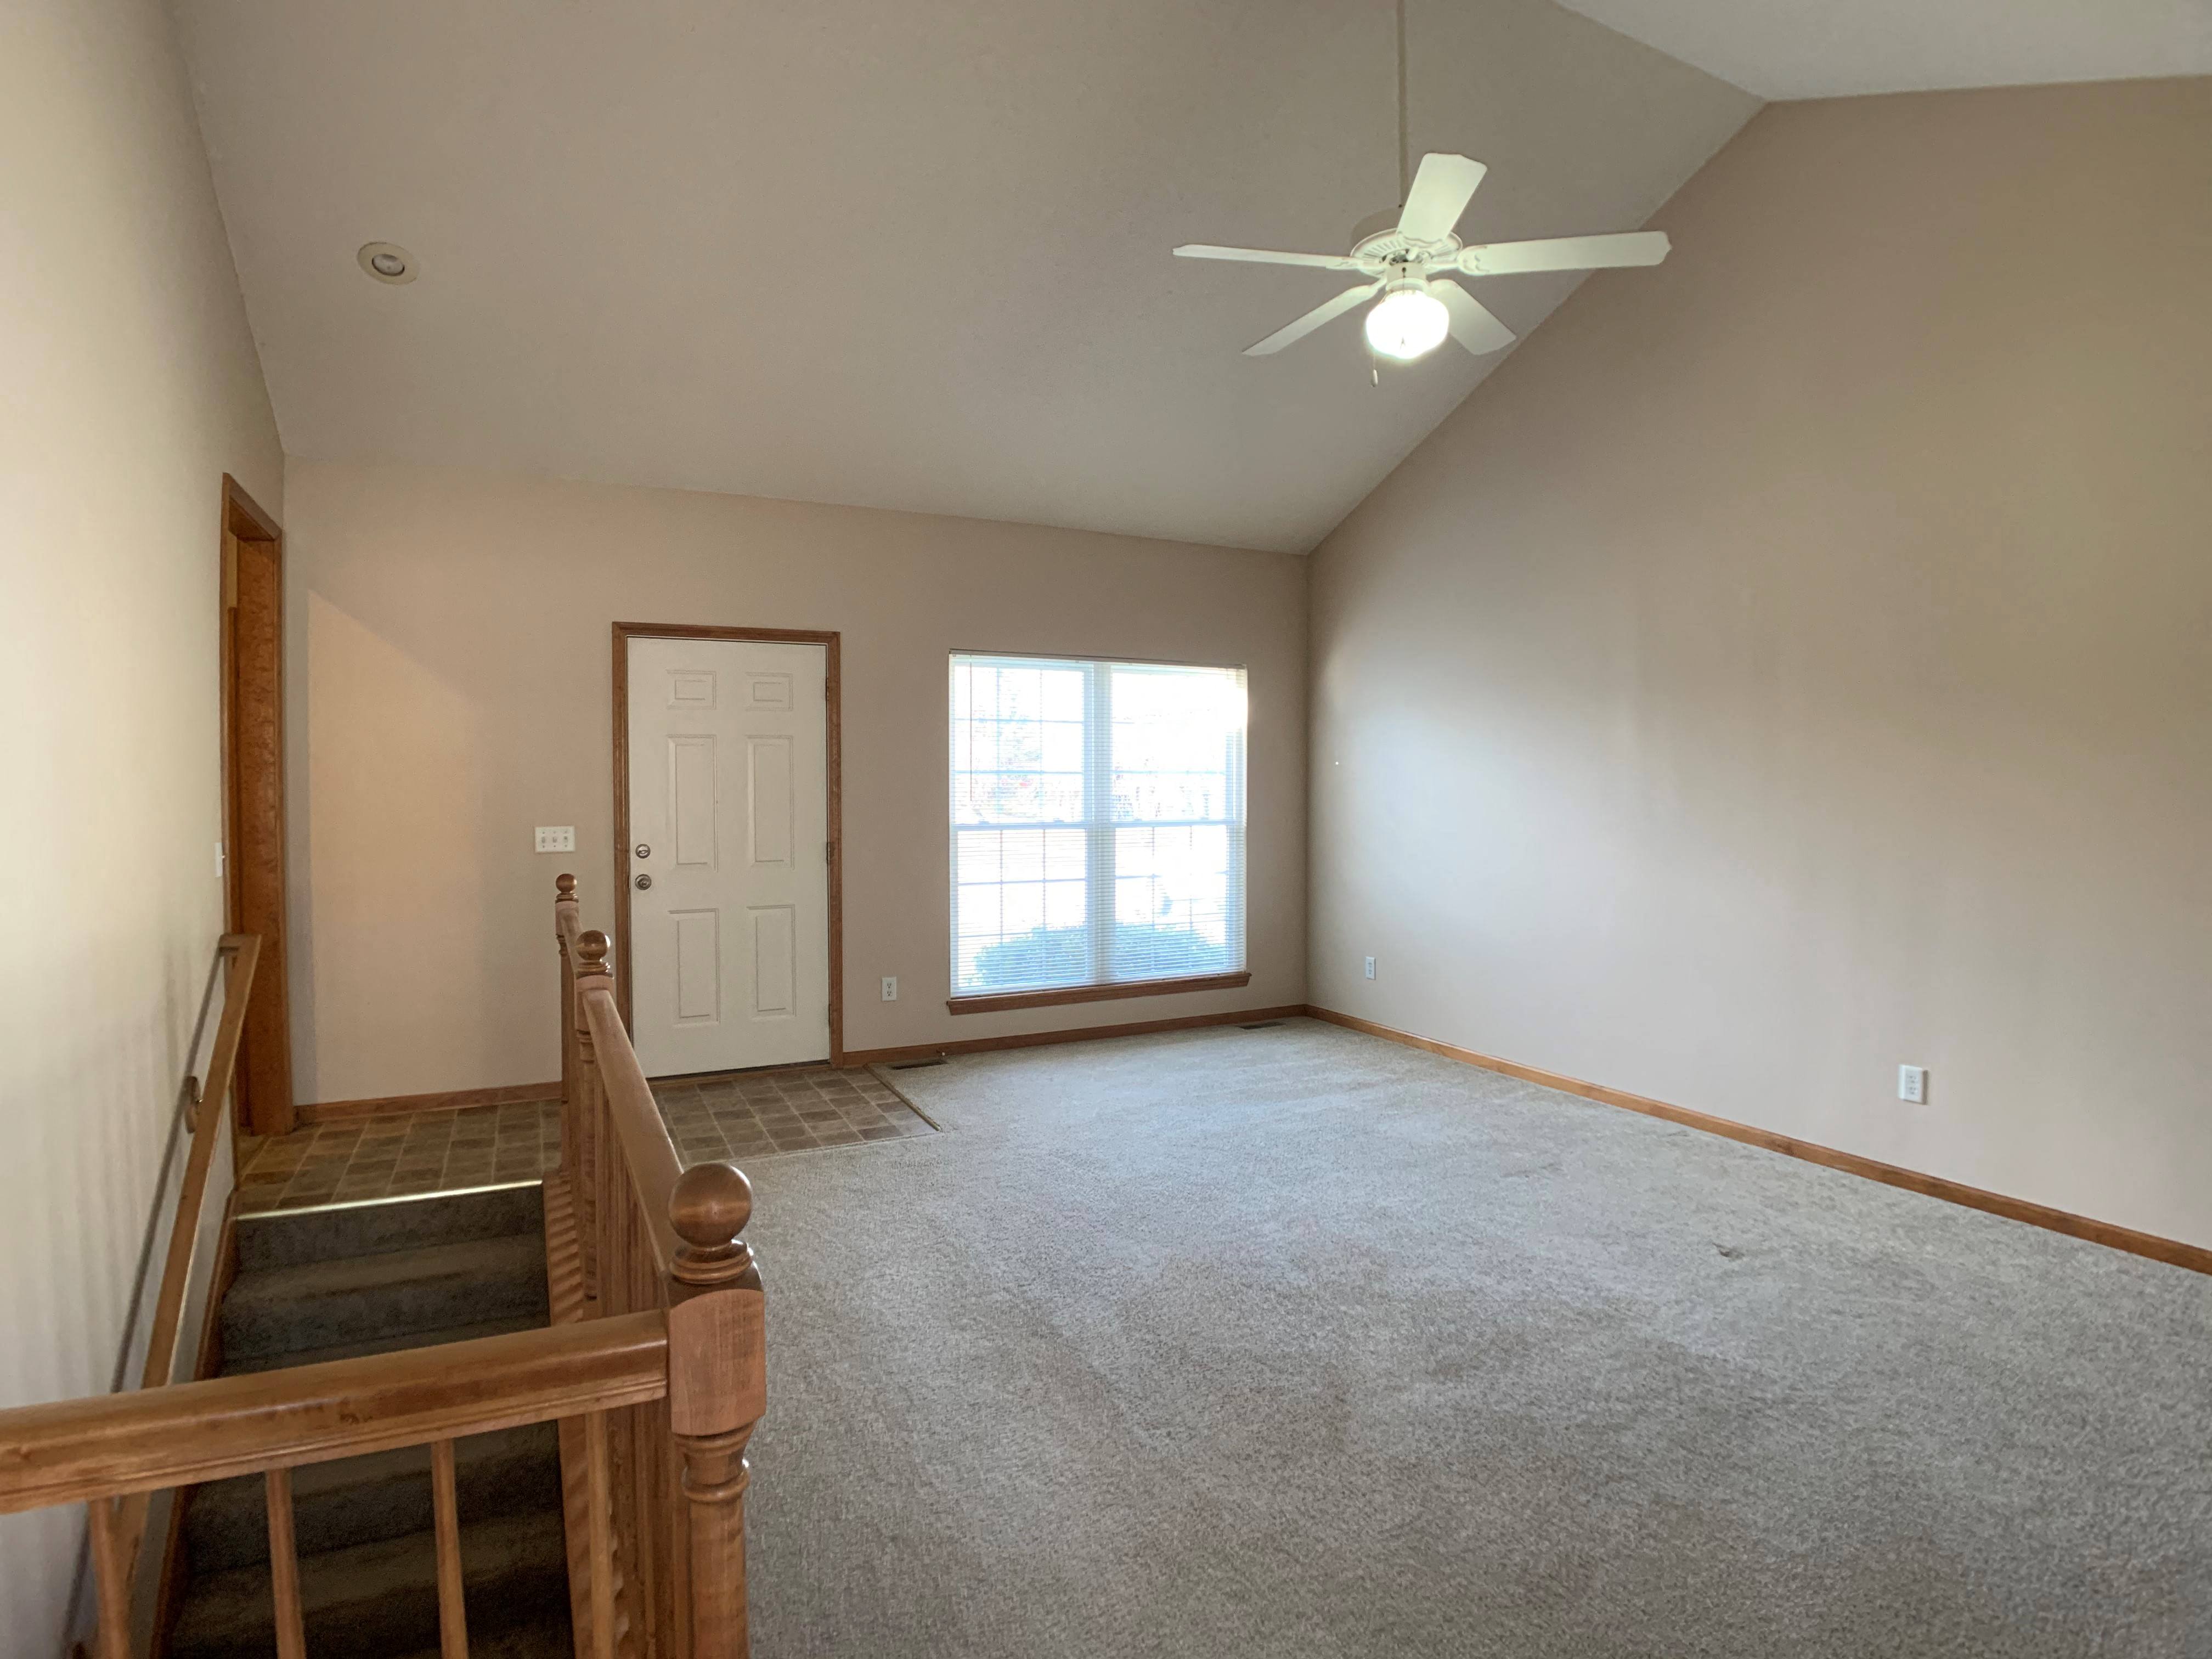 Living room with large window and ceiling fan